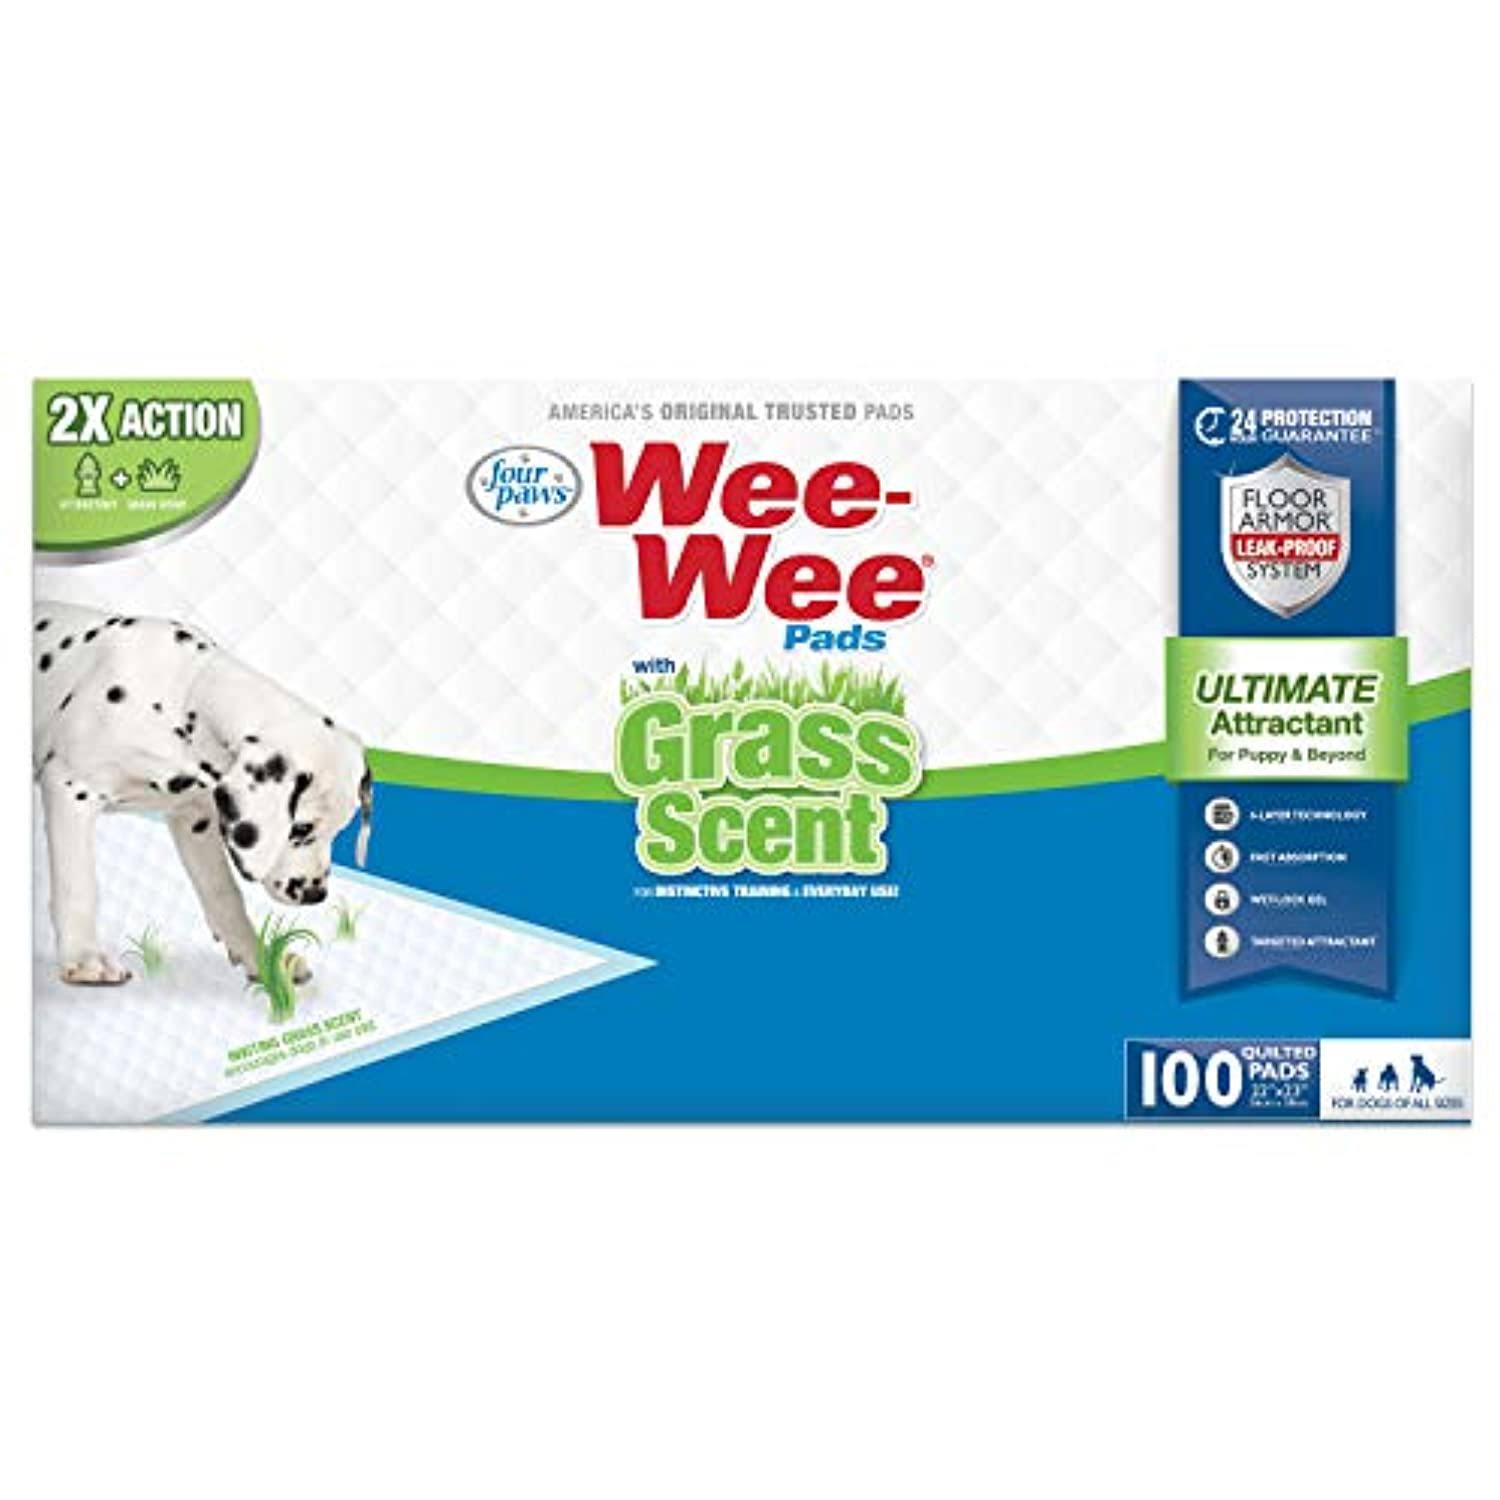 Four Paws Wee Wee Grass Scented Puppy Pads 100 Count